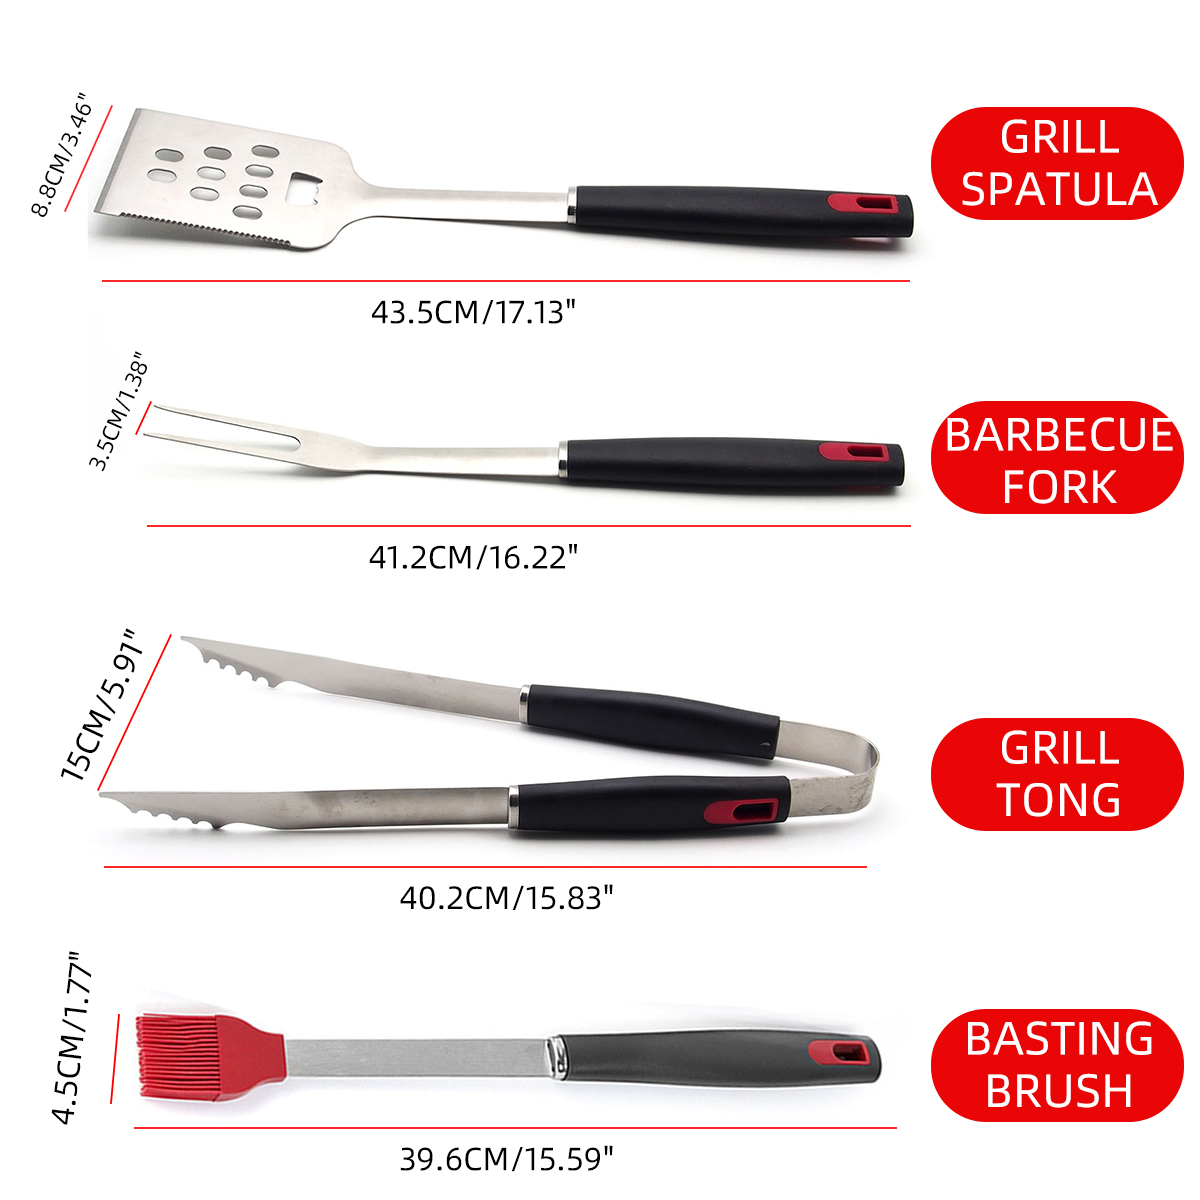 4PCS-BBQ-Stainless-Steel-Barbecue-Utensils-Kit-Outdoor-Grill-Tools-Brush-Tong-Tools-Kit-1708219-8